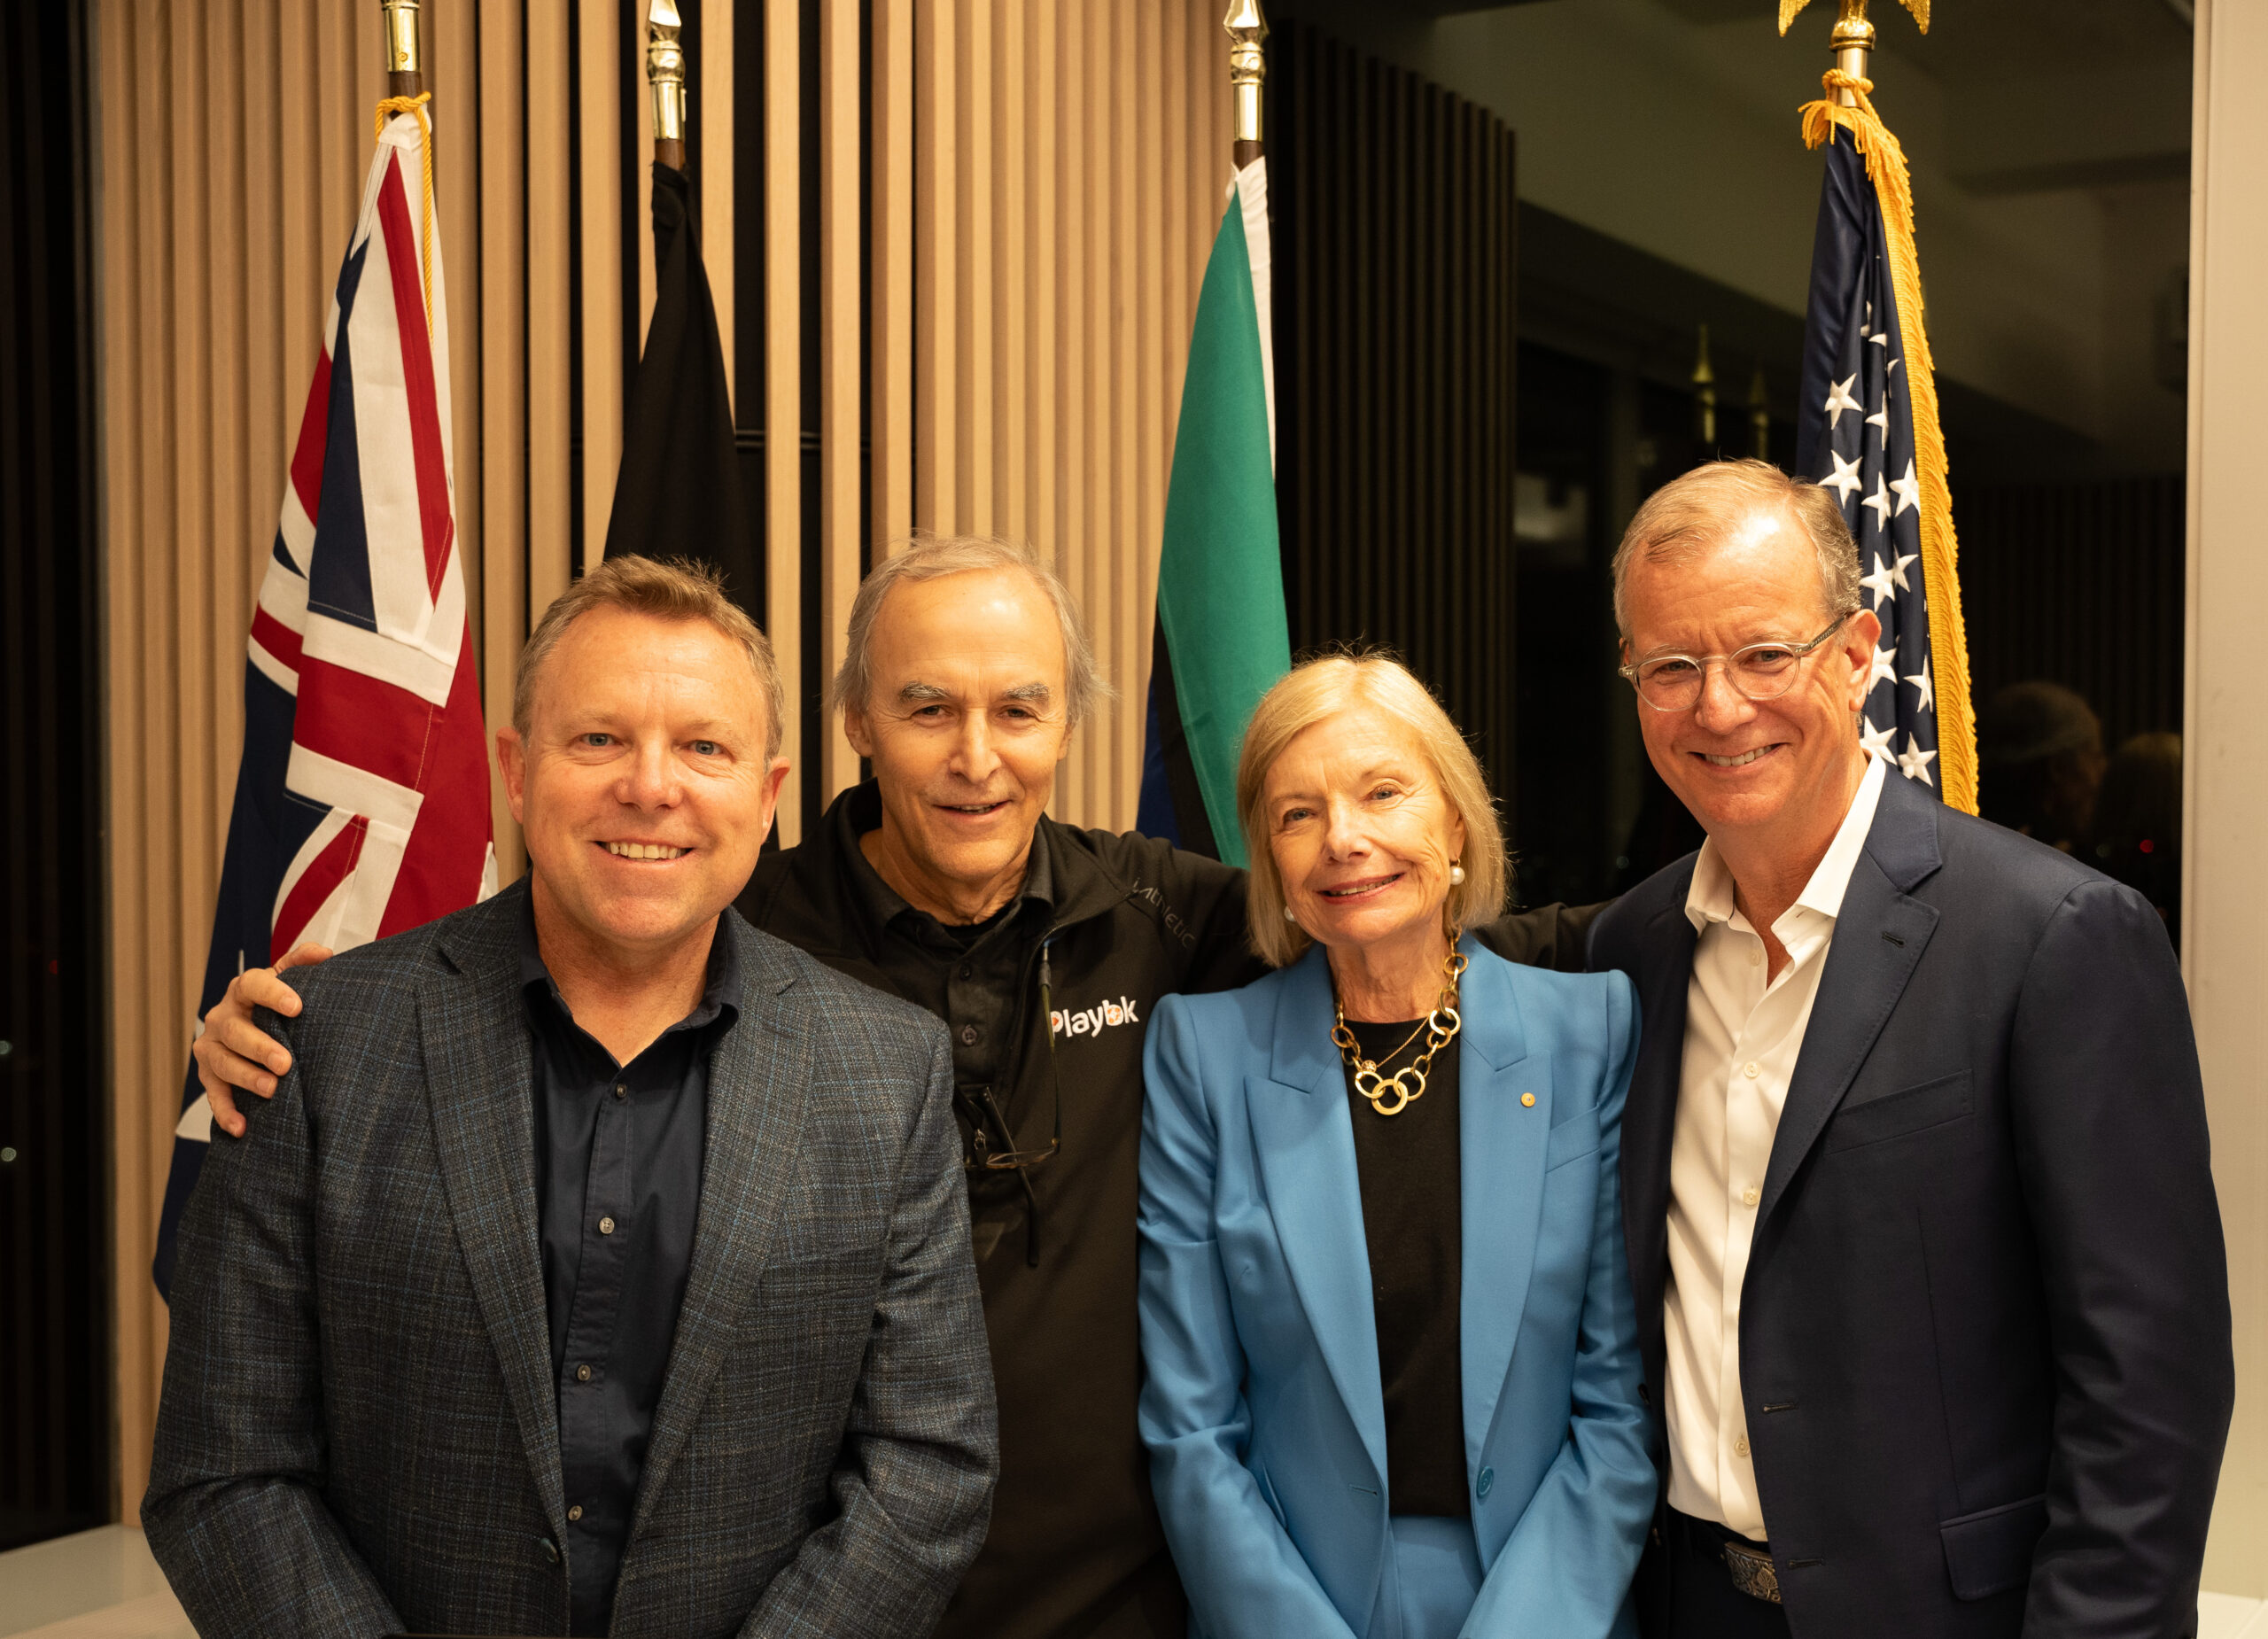  Heather Ridout, AO, Consul General of Australia to New York, Burton joined Delaware North chief executive officer Jerry Jacobs Jr., 